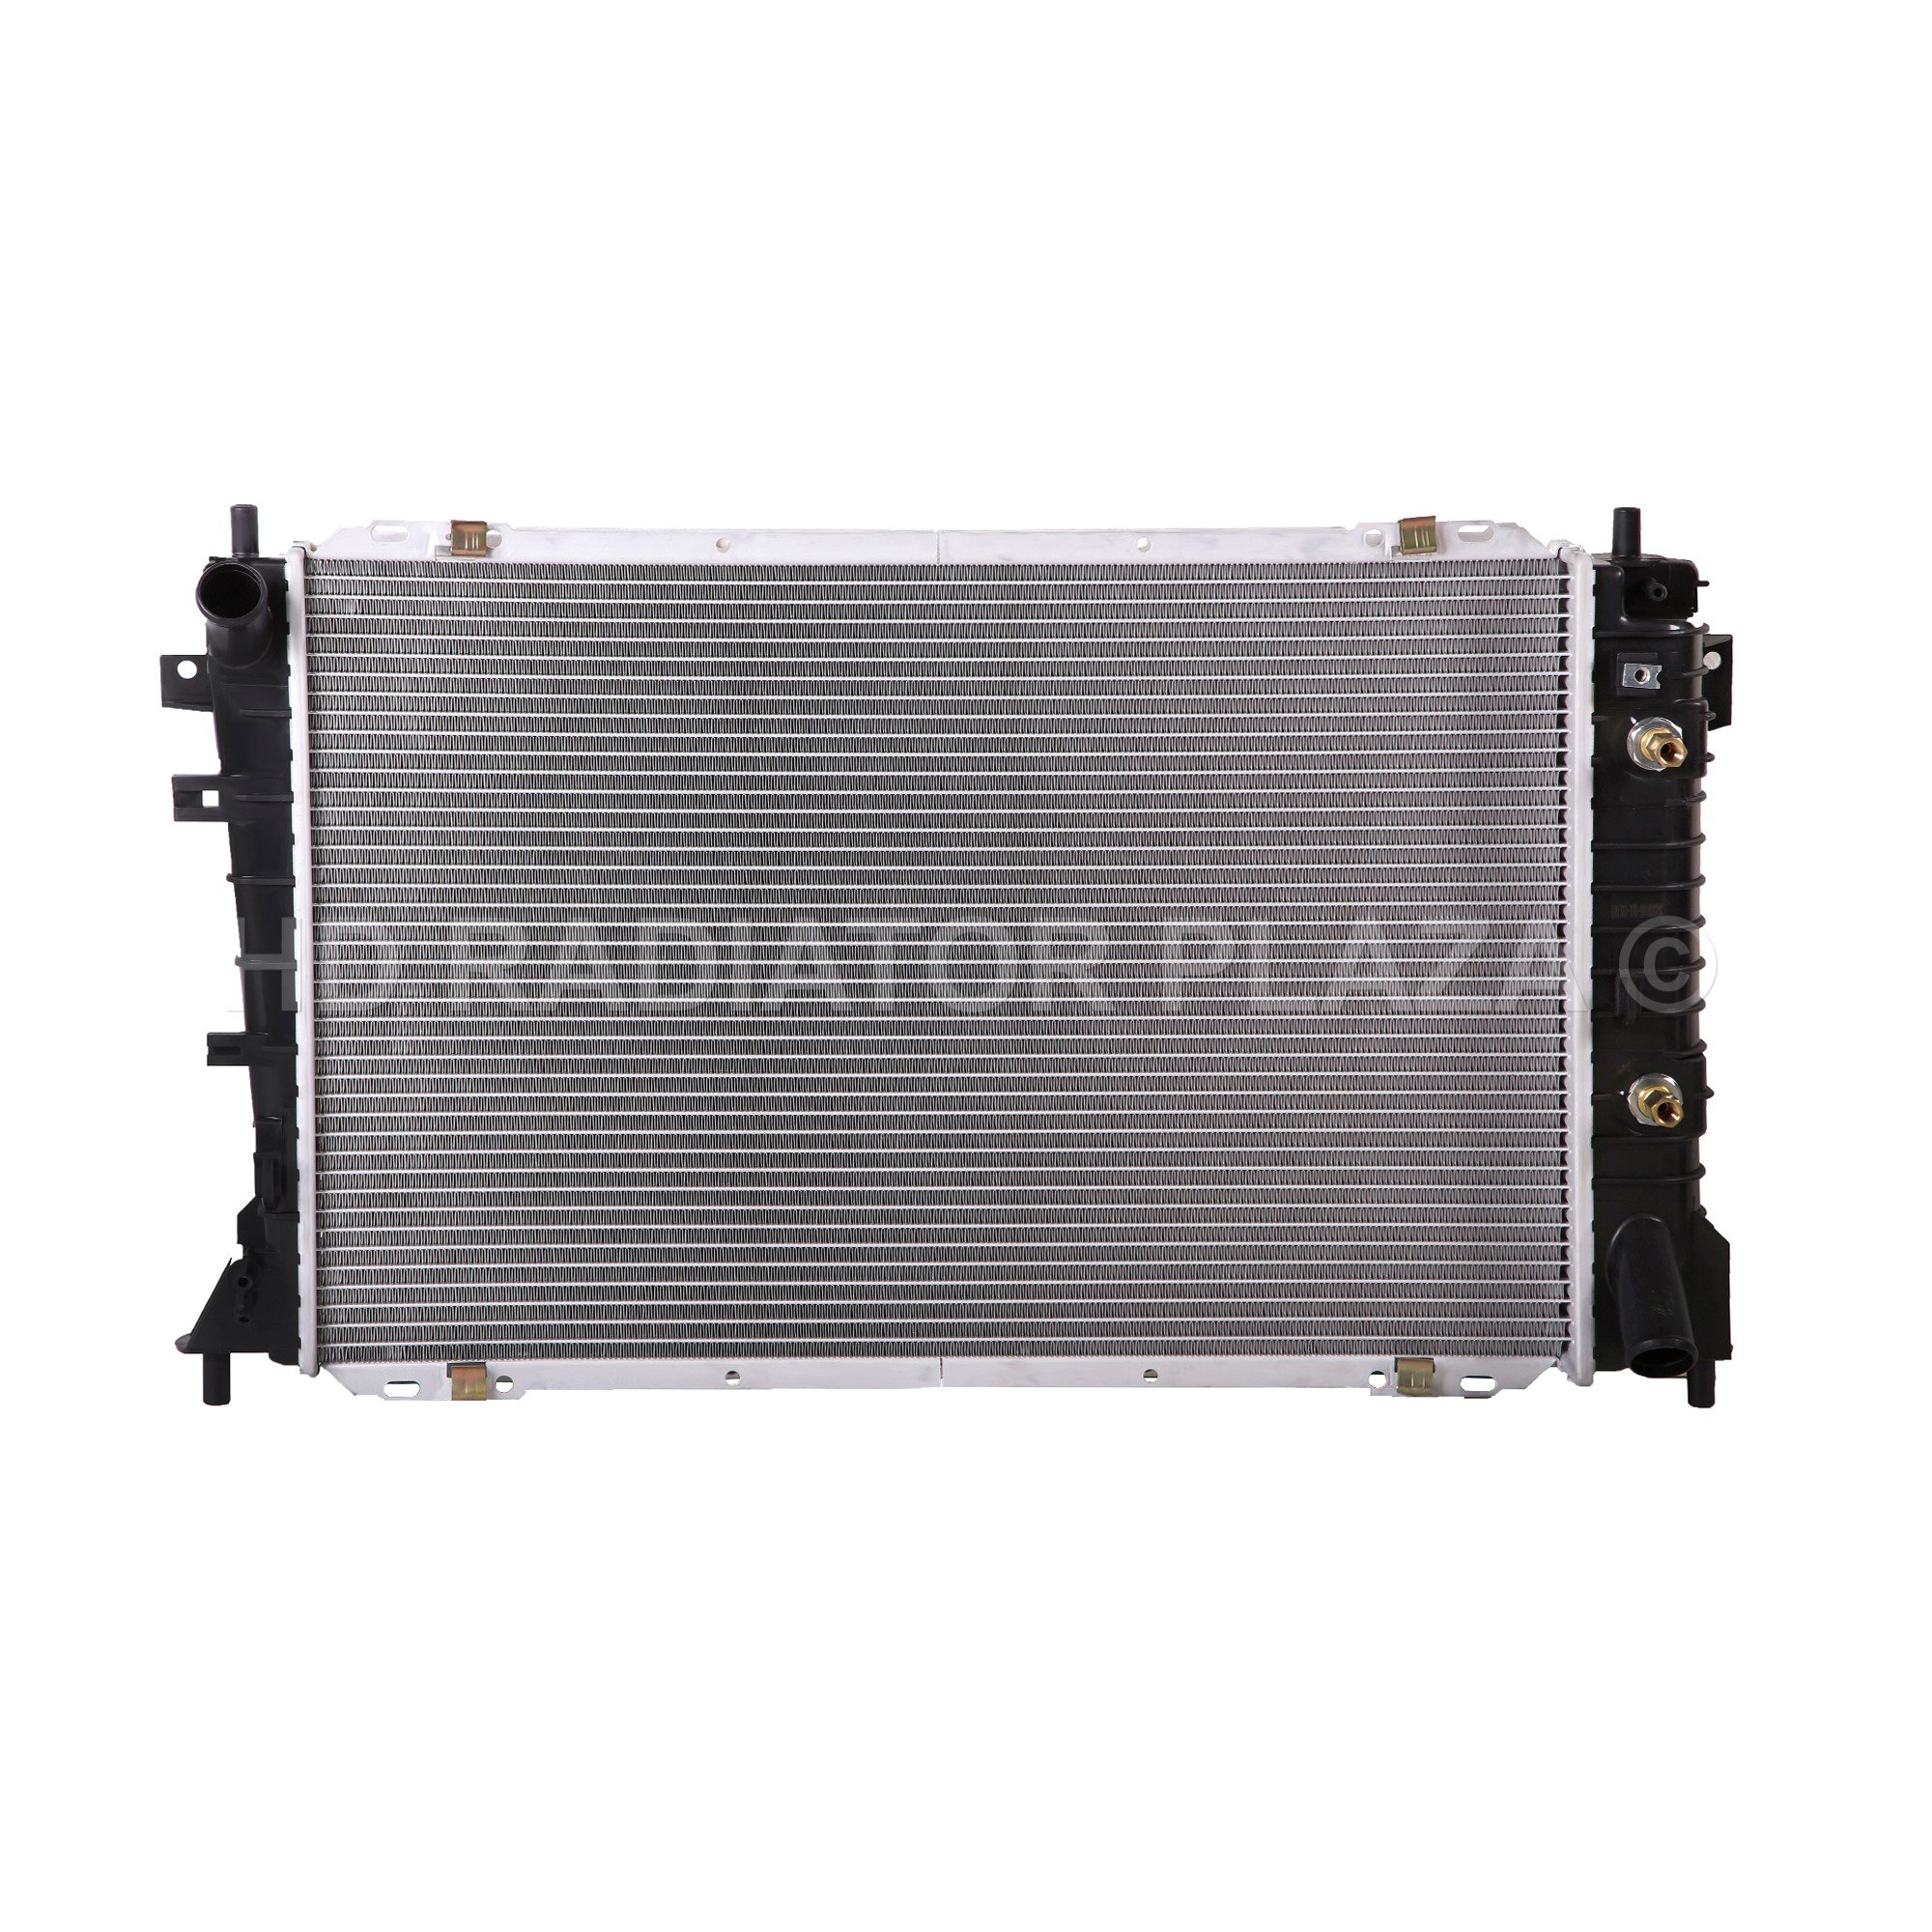 Radiator for 95-97 Ford Crown Victoria/Grand Marquis, Lincoln Town Car, Mercury Grand Marquis